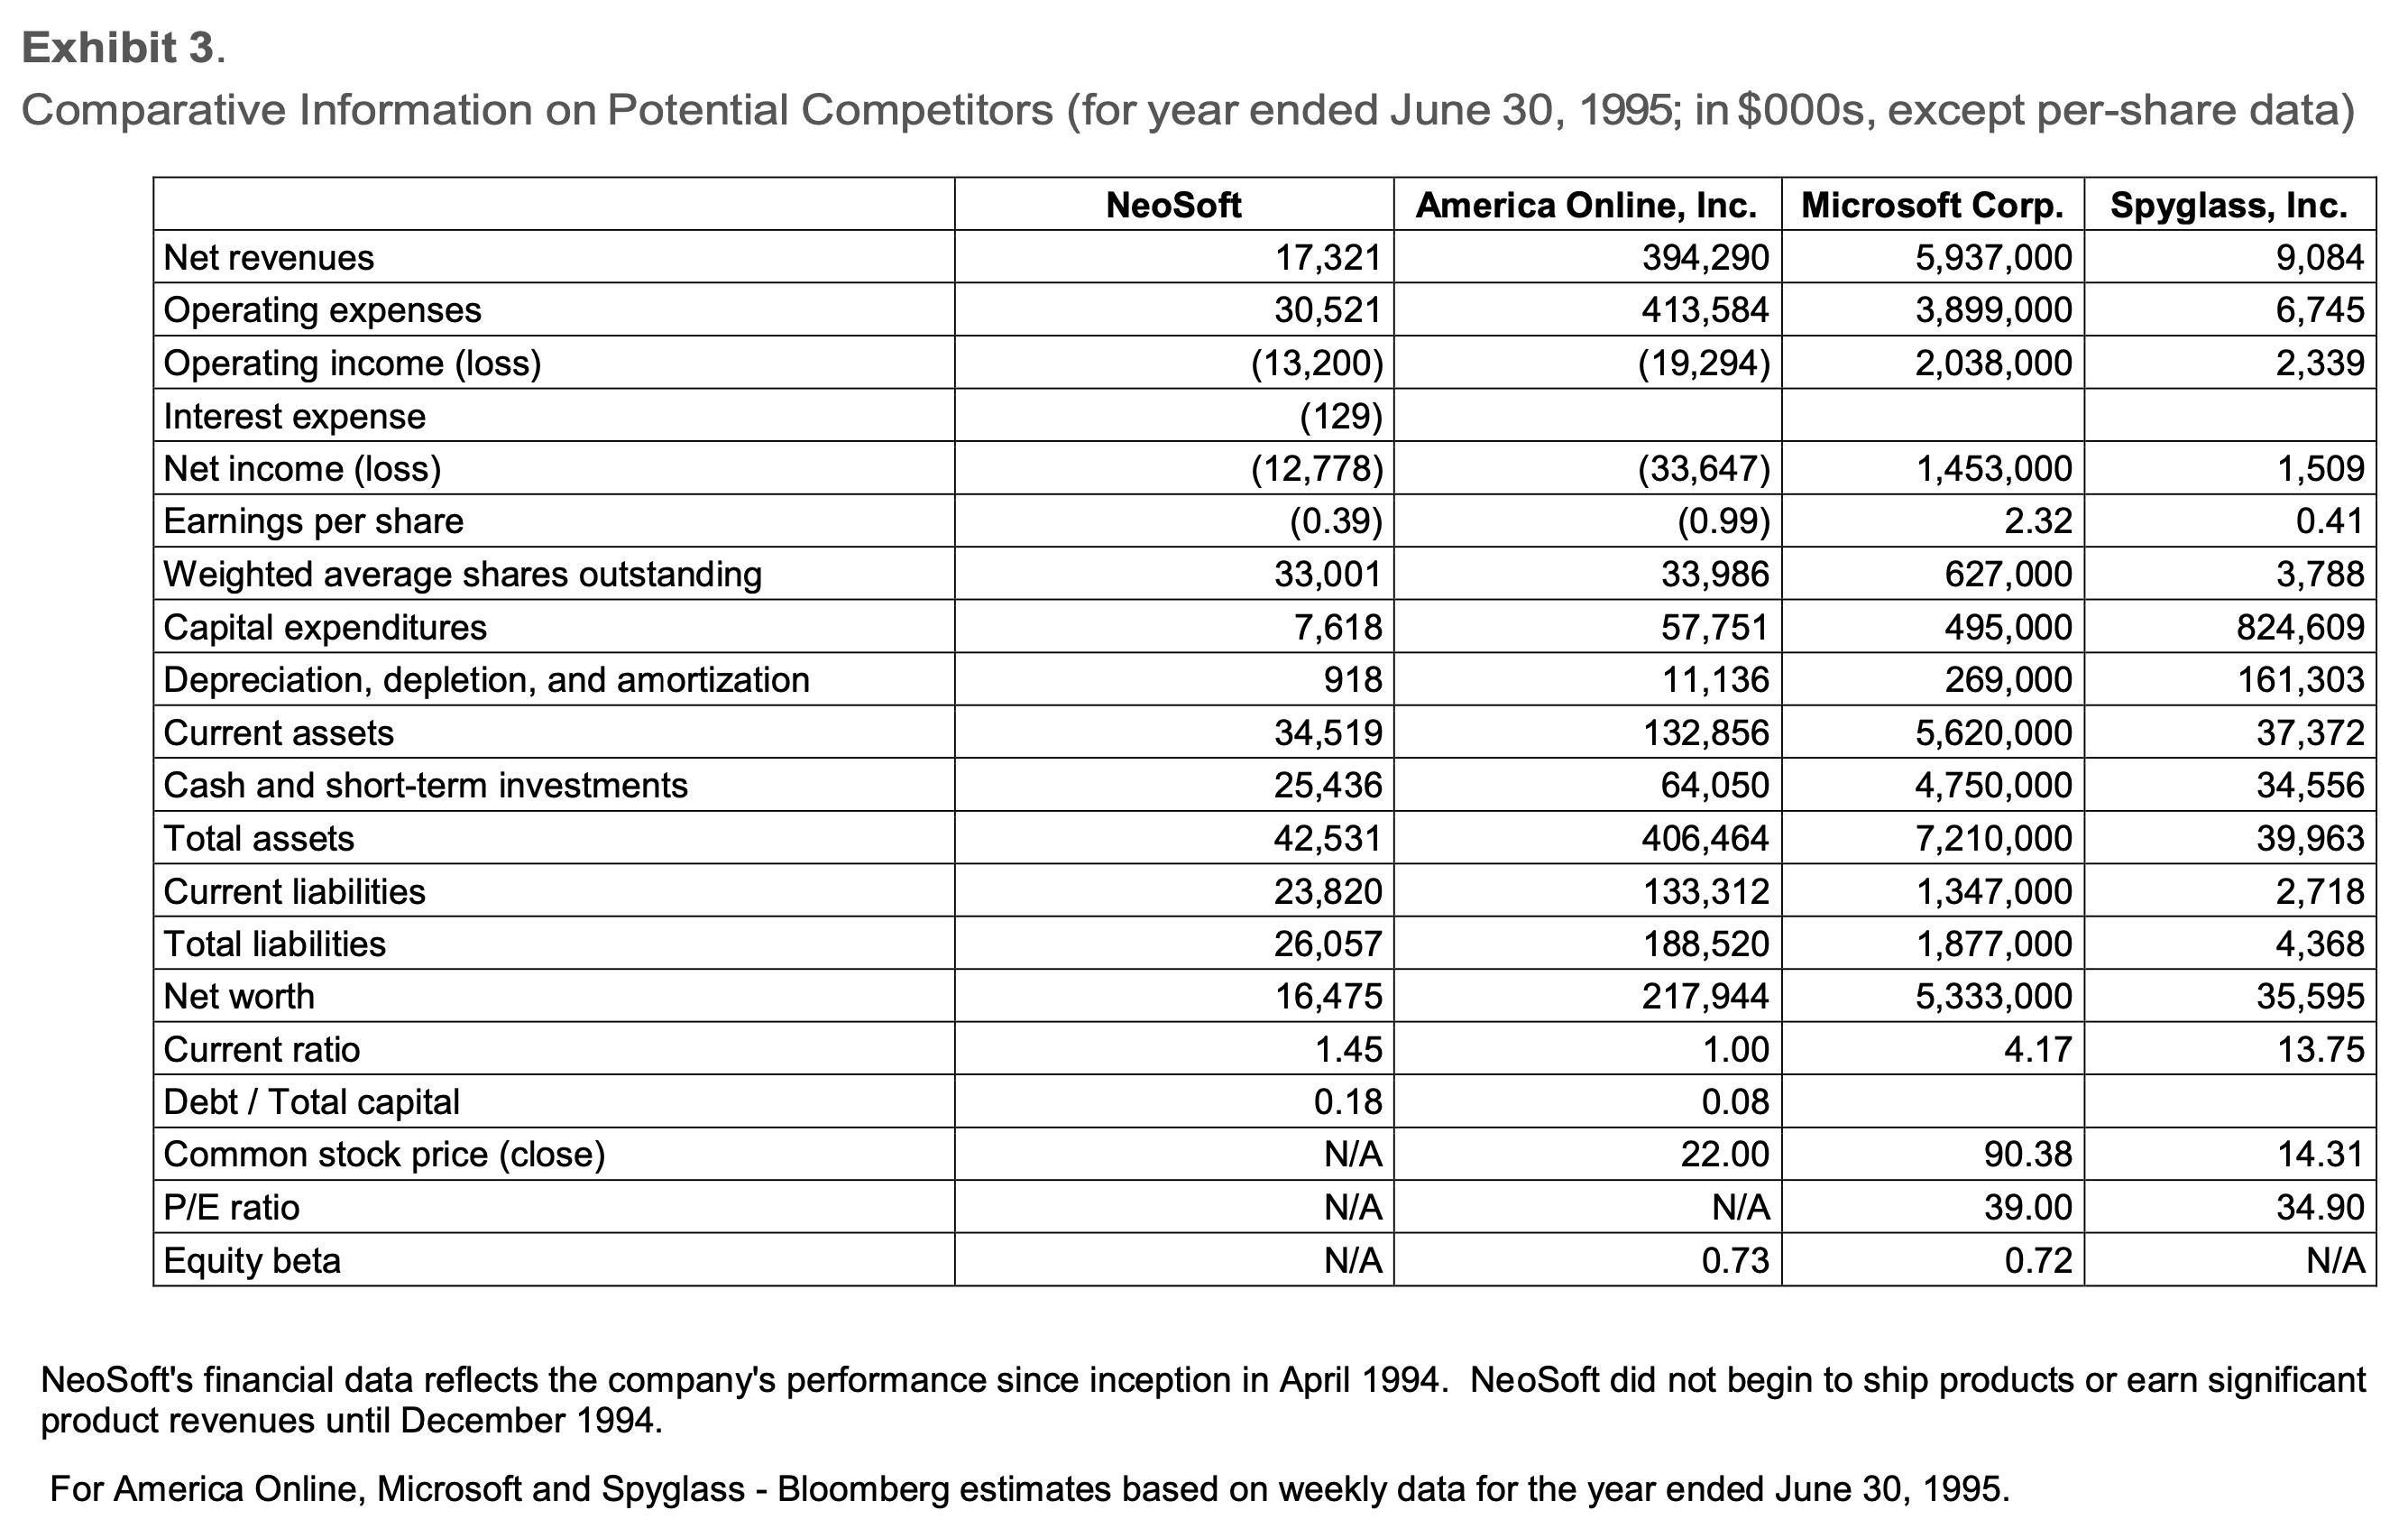 Exhibit 3. Comparative Information on Potential Competitors (for year ended June 30, 1995; in $000s, except per-share data) A